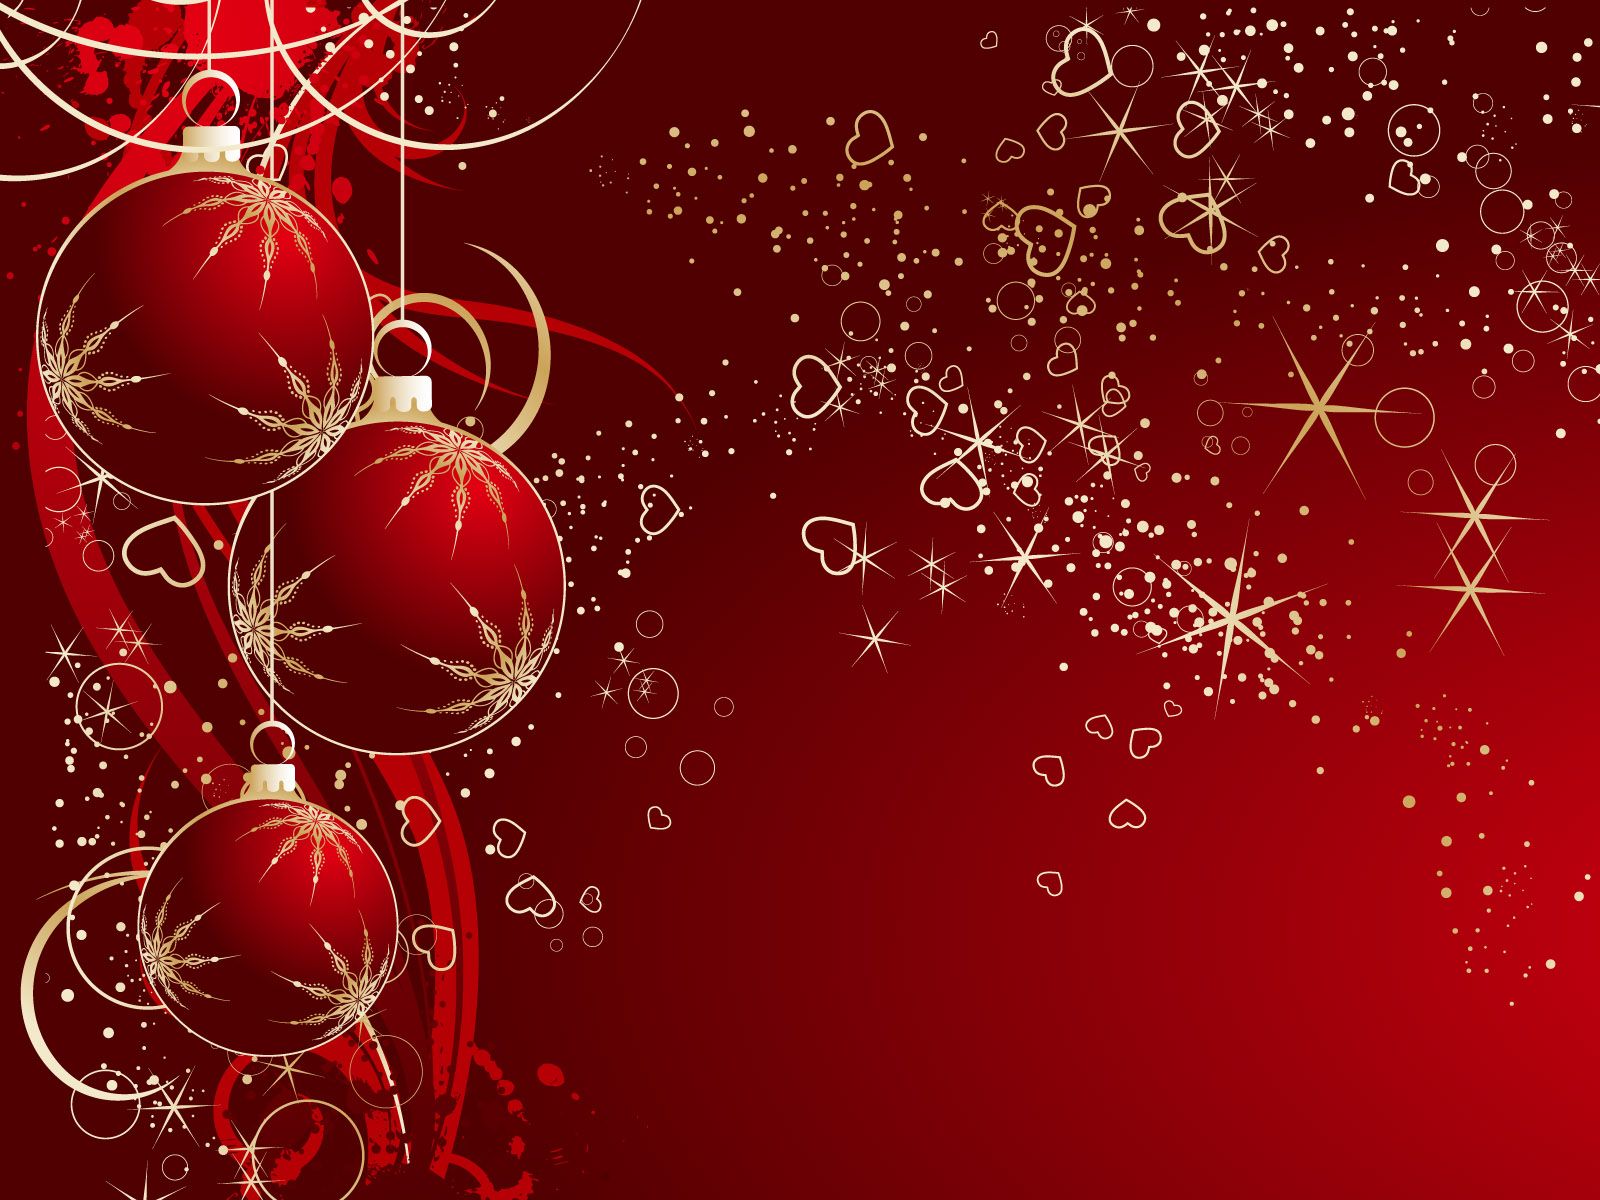 Download Christmas Hd P Wallpaper Full HD Backgrounds